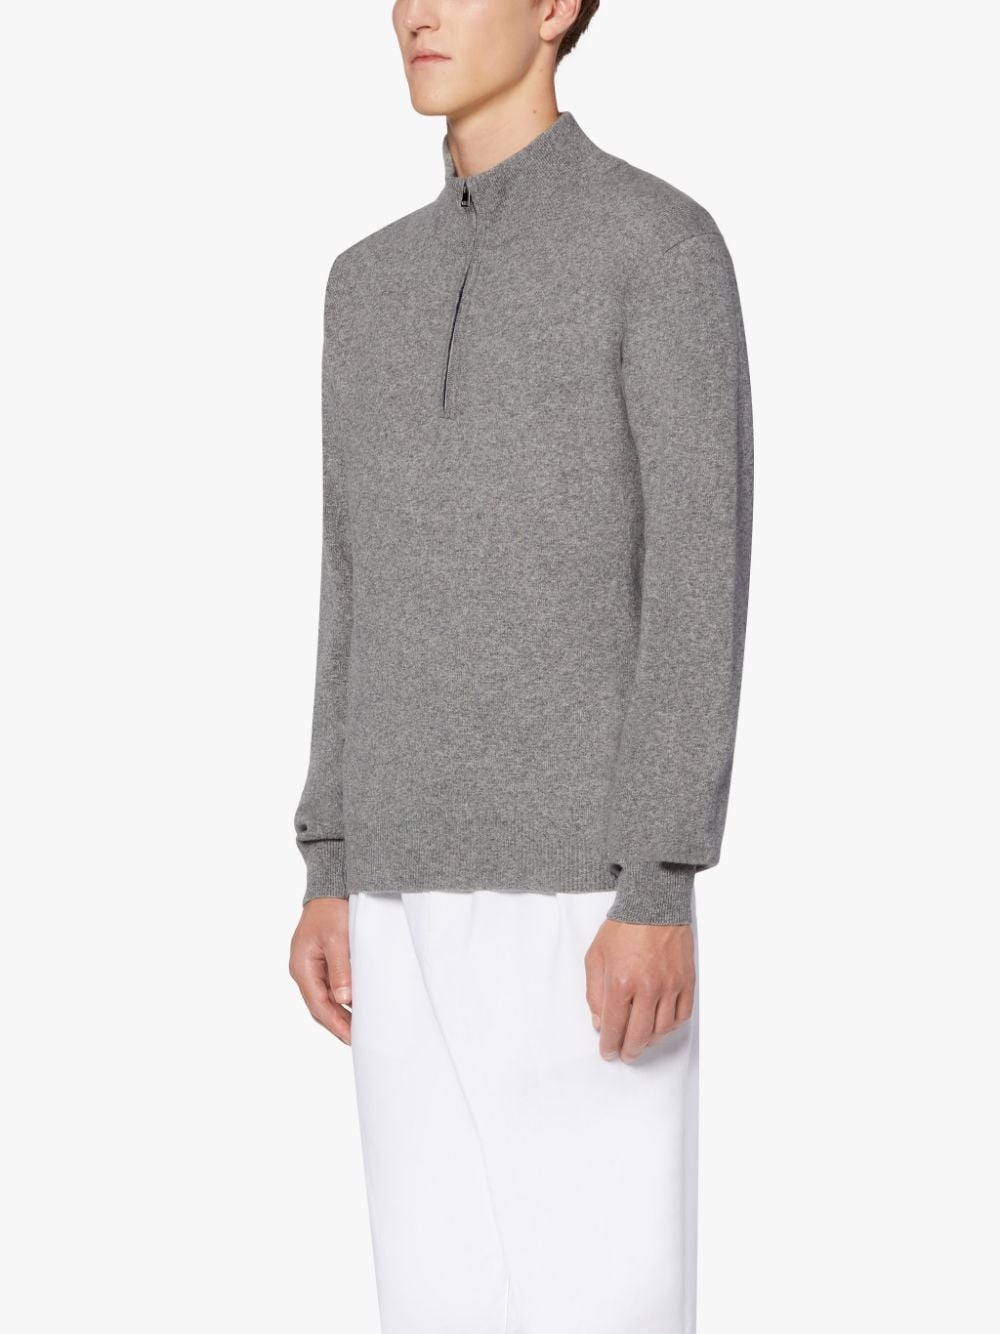 IN AND OUT GREY WOOL SWEATER | GKM-203 - 3